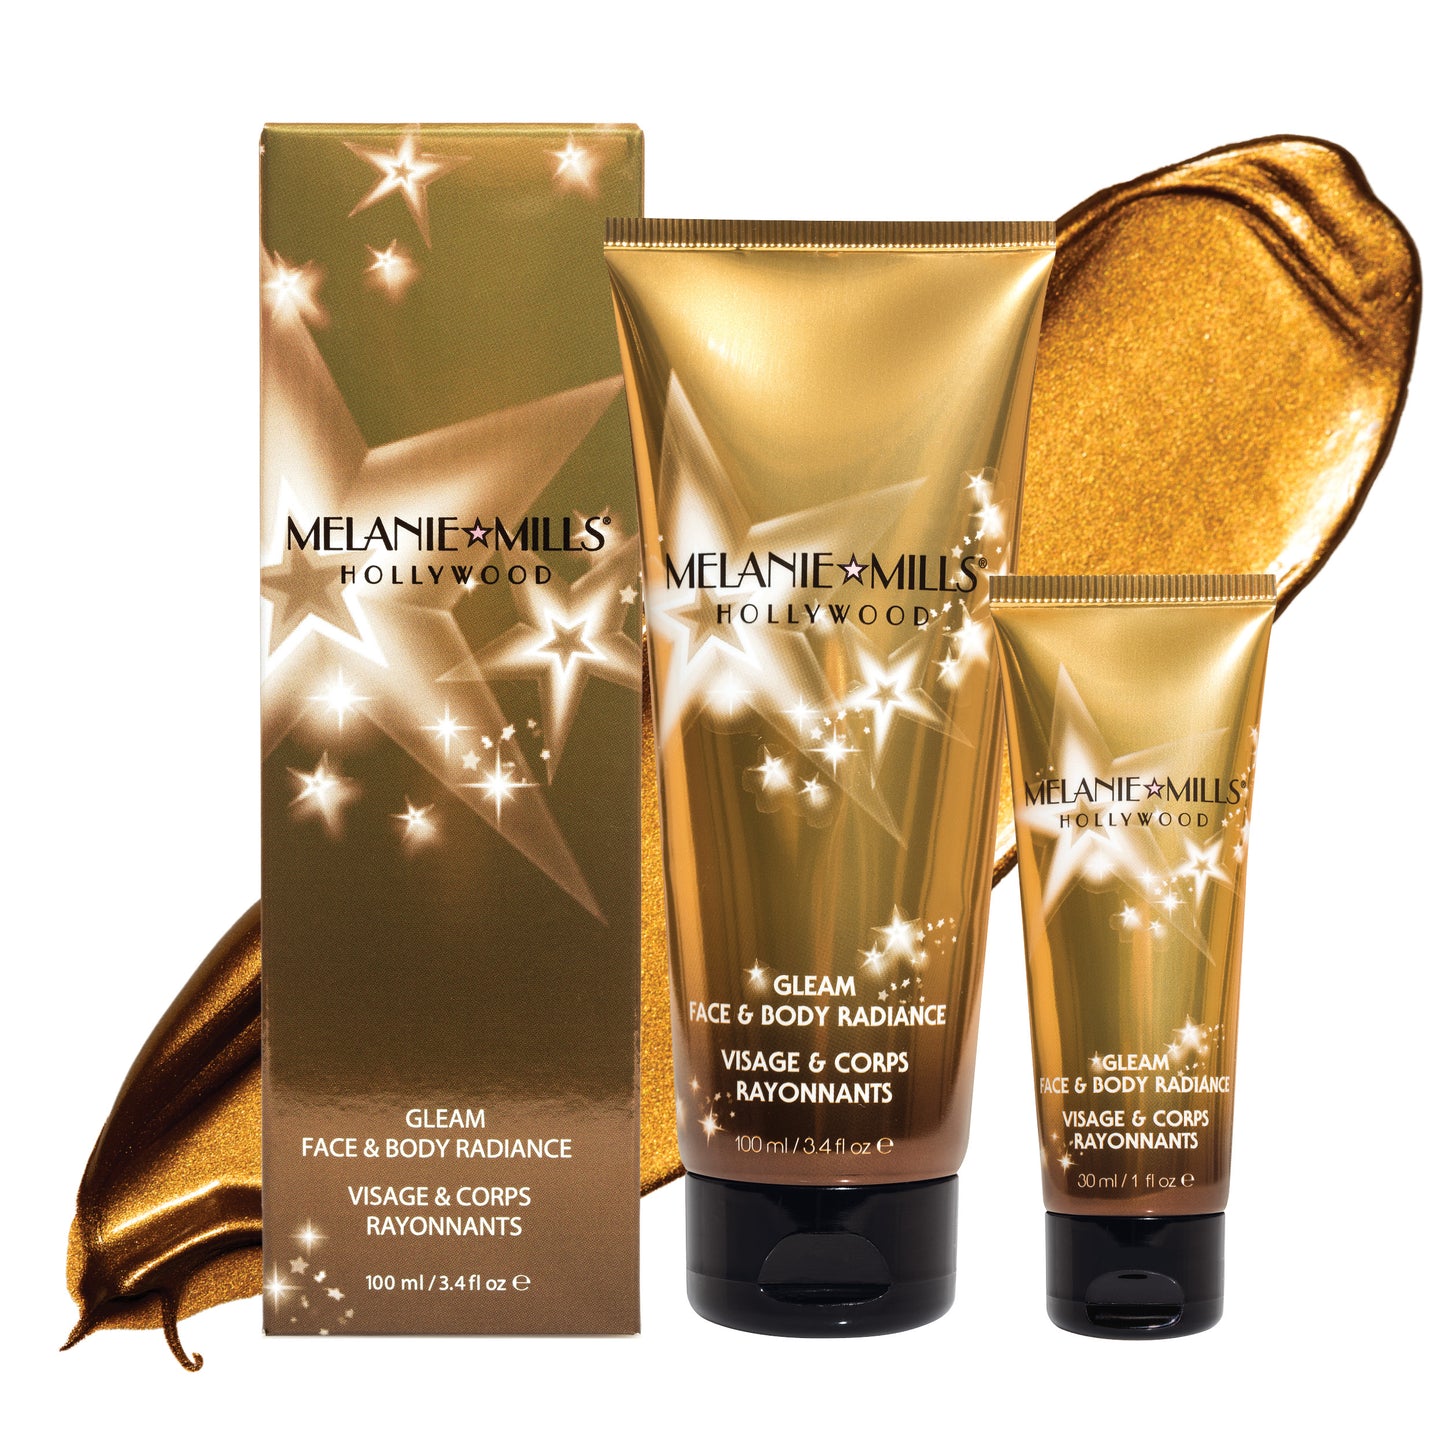 Melanie Mills Hollywood Gleam Body Radiance All In One Makeup, Moisturiser & Glow For Face & Body Bronze Gold